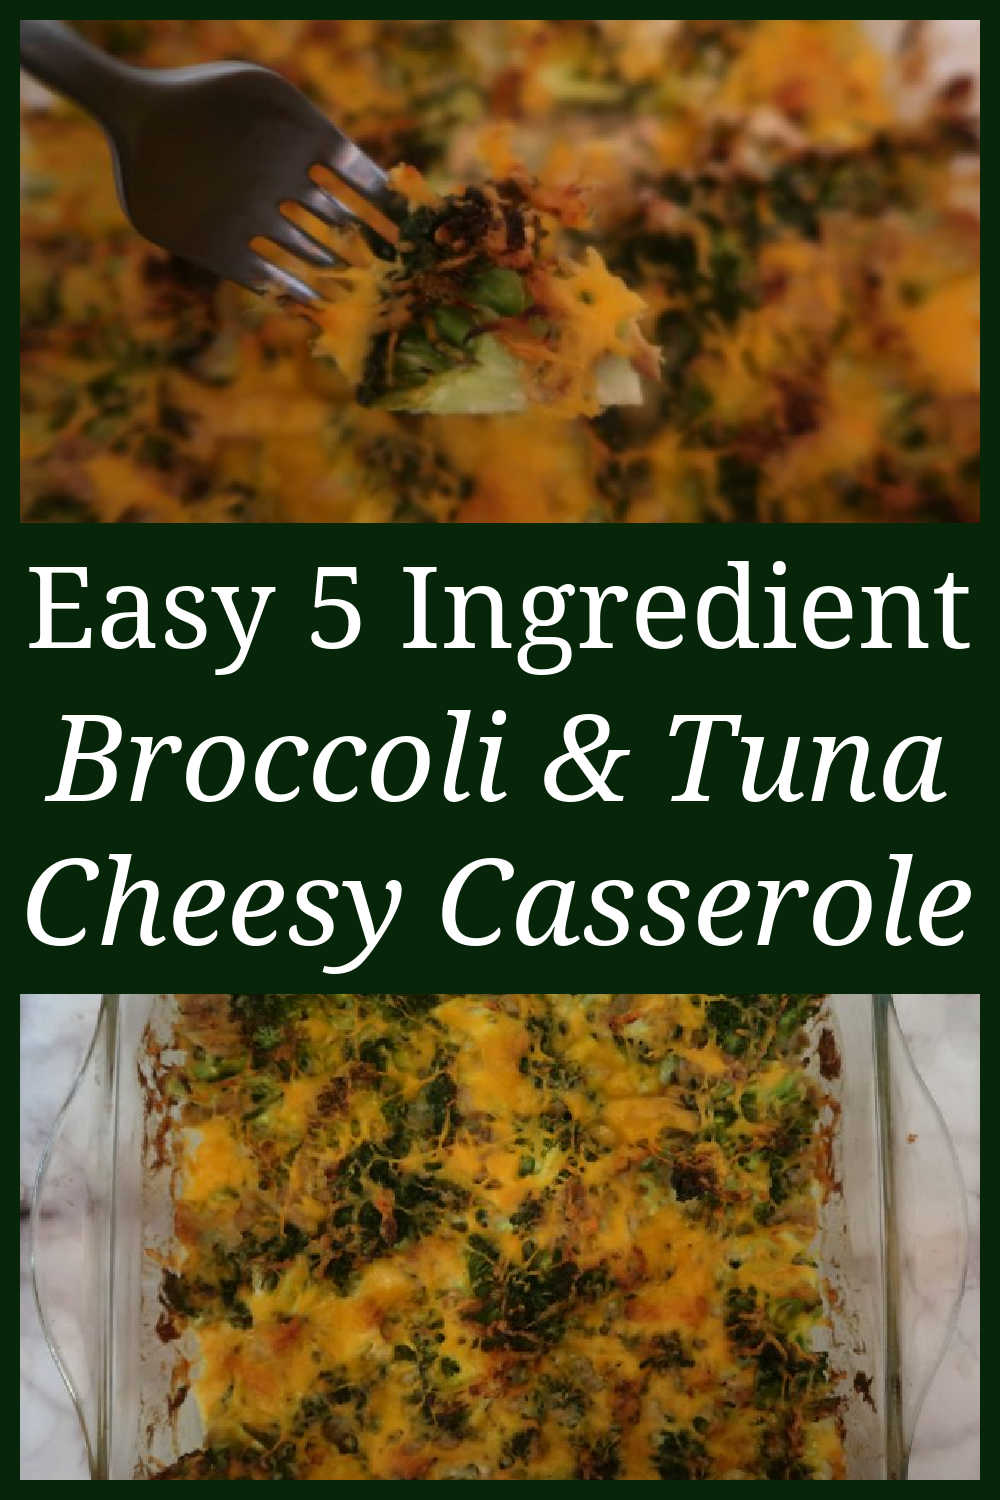 Broccoli Tuna Casserole Recipe - The best easy and cheesy broccoli and tuna one dish bake from scratch with cheese - Quick and Easy Cheap Budget Dinner Ideas.